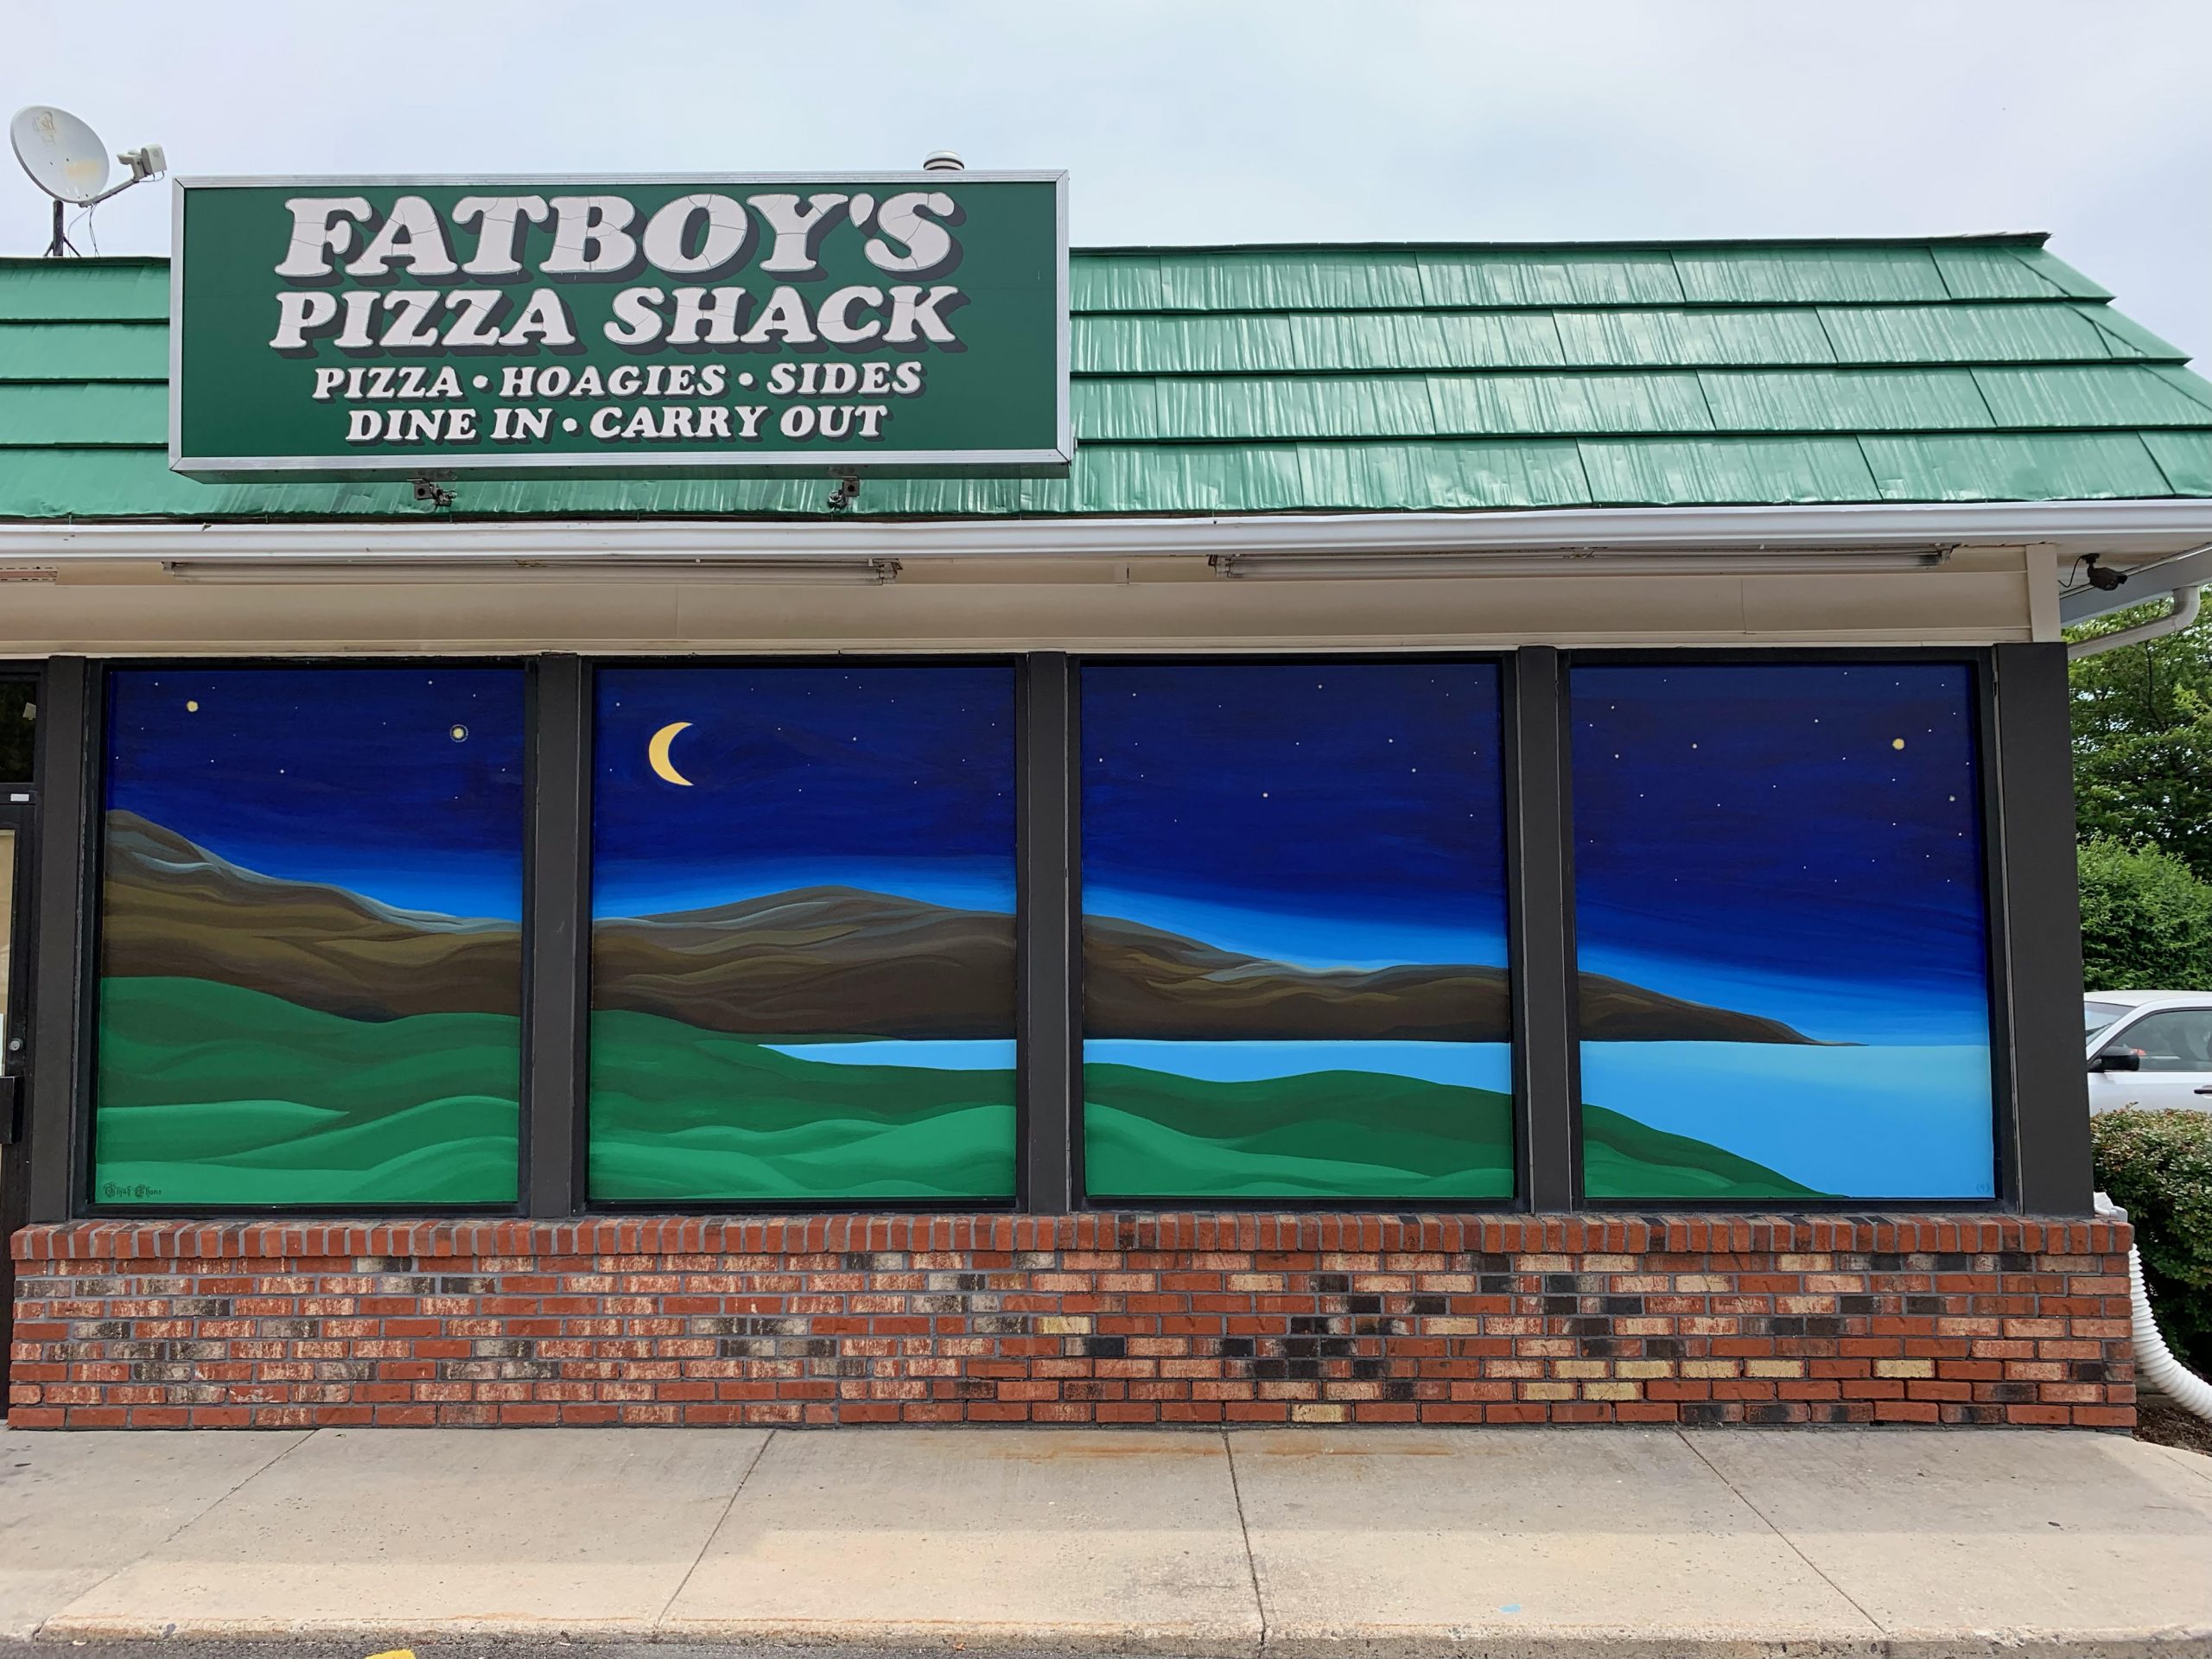 Fatboy’s Pizza Mural Frostburg, MD